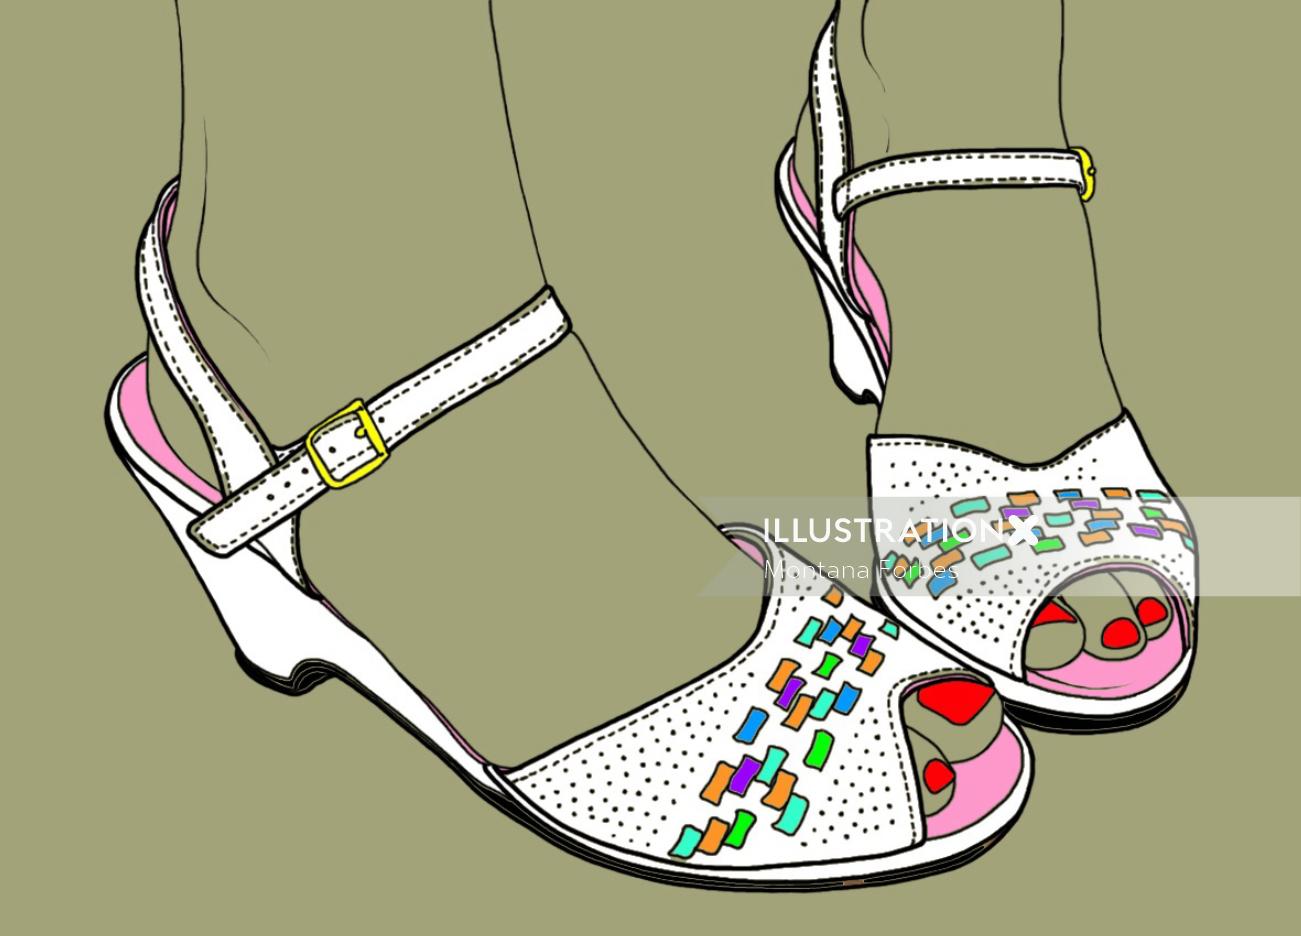 Wedge shoe illustration by Montana Forbes